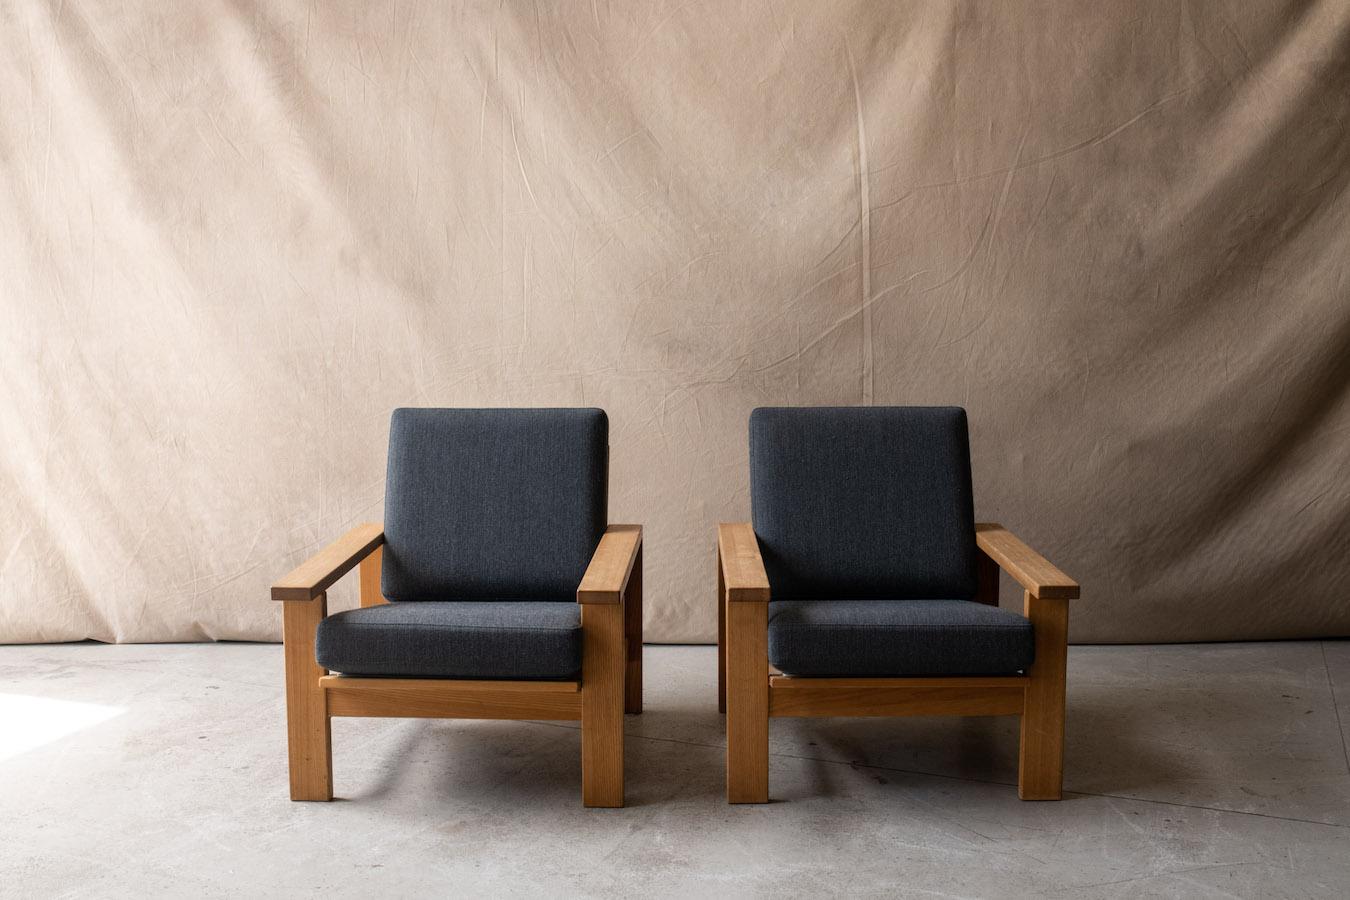 Vintage pair of lounge chairs from Denmark oak with grey wool upholstery. Solid oak construction with light wear and patina. Manufactured by Getama, Denmark.

We don't have the time to write an extensive description on each of our pieces. We prefer